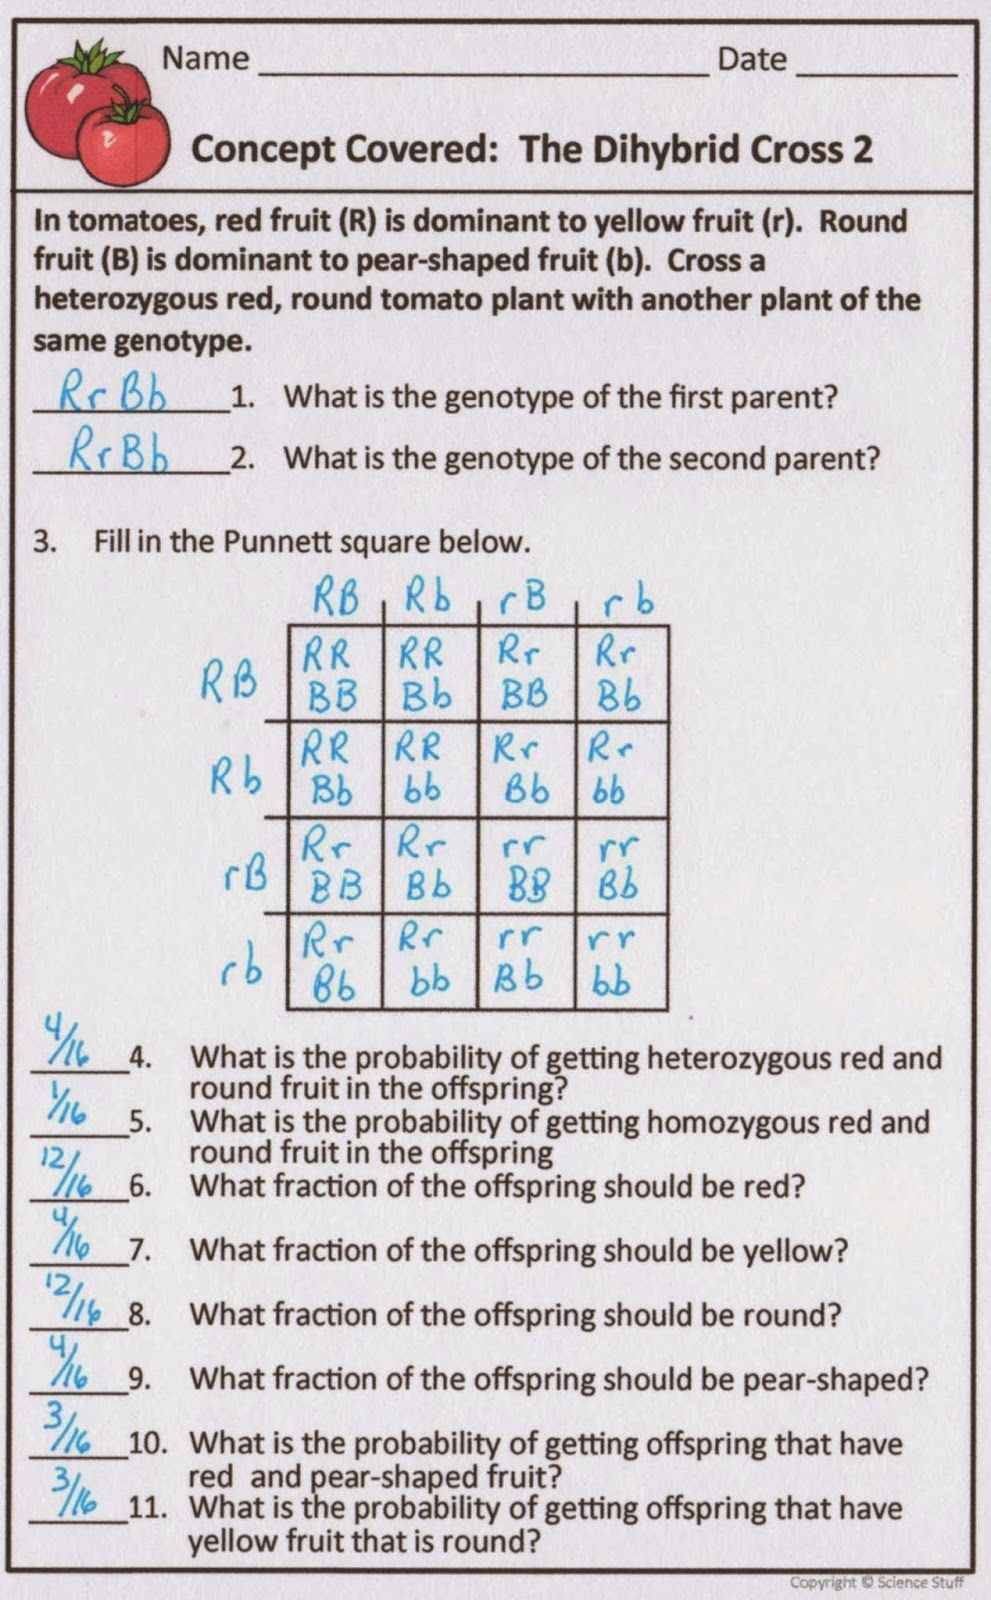 Genetics Problems Worksheet Answers Genetics Problems and Activities for Biology Interactive